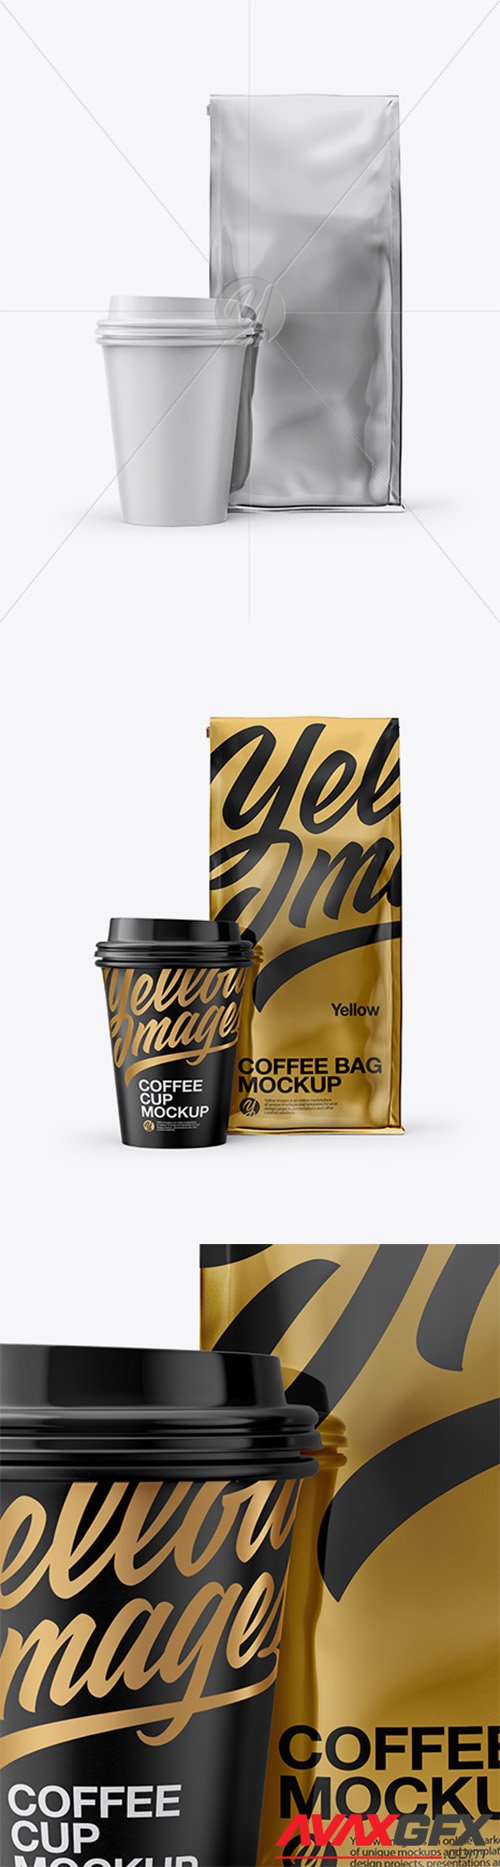 Metallic Bag with Coffee Cup Mockup - Front View 23266